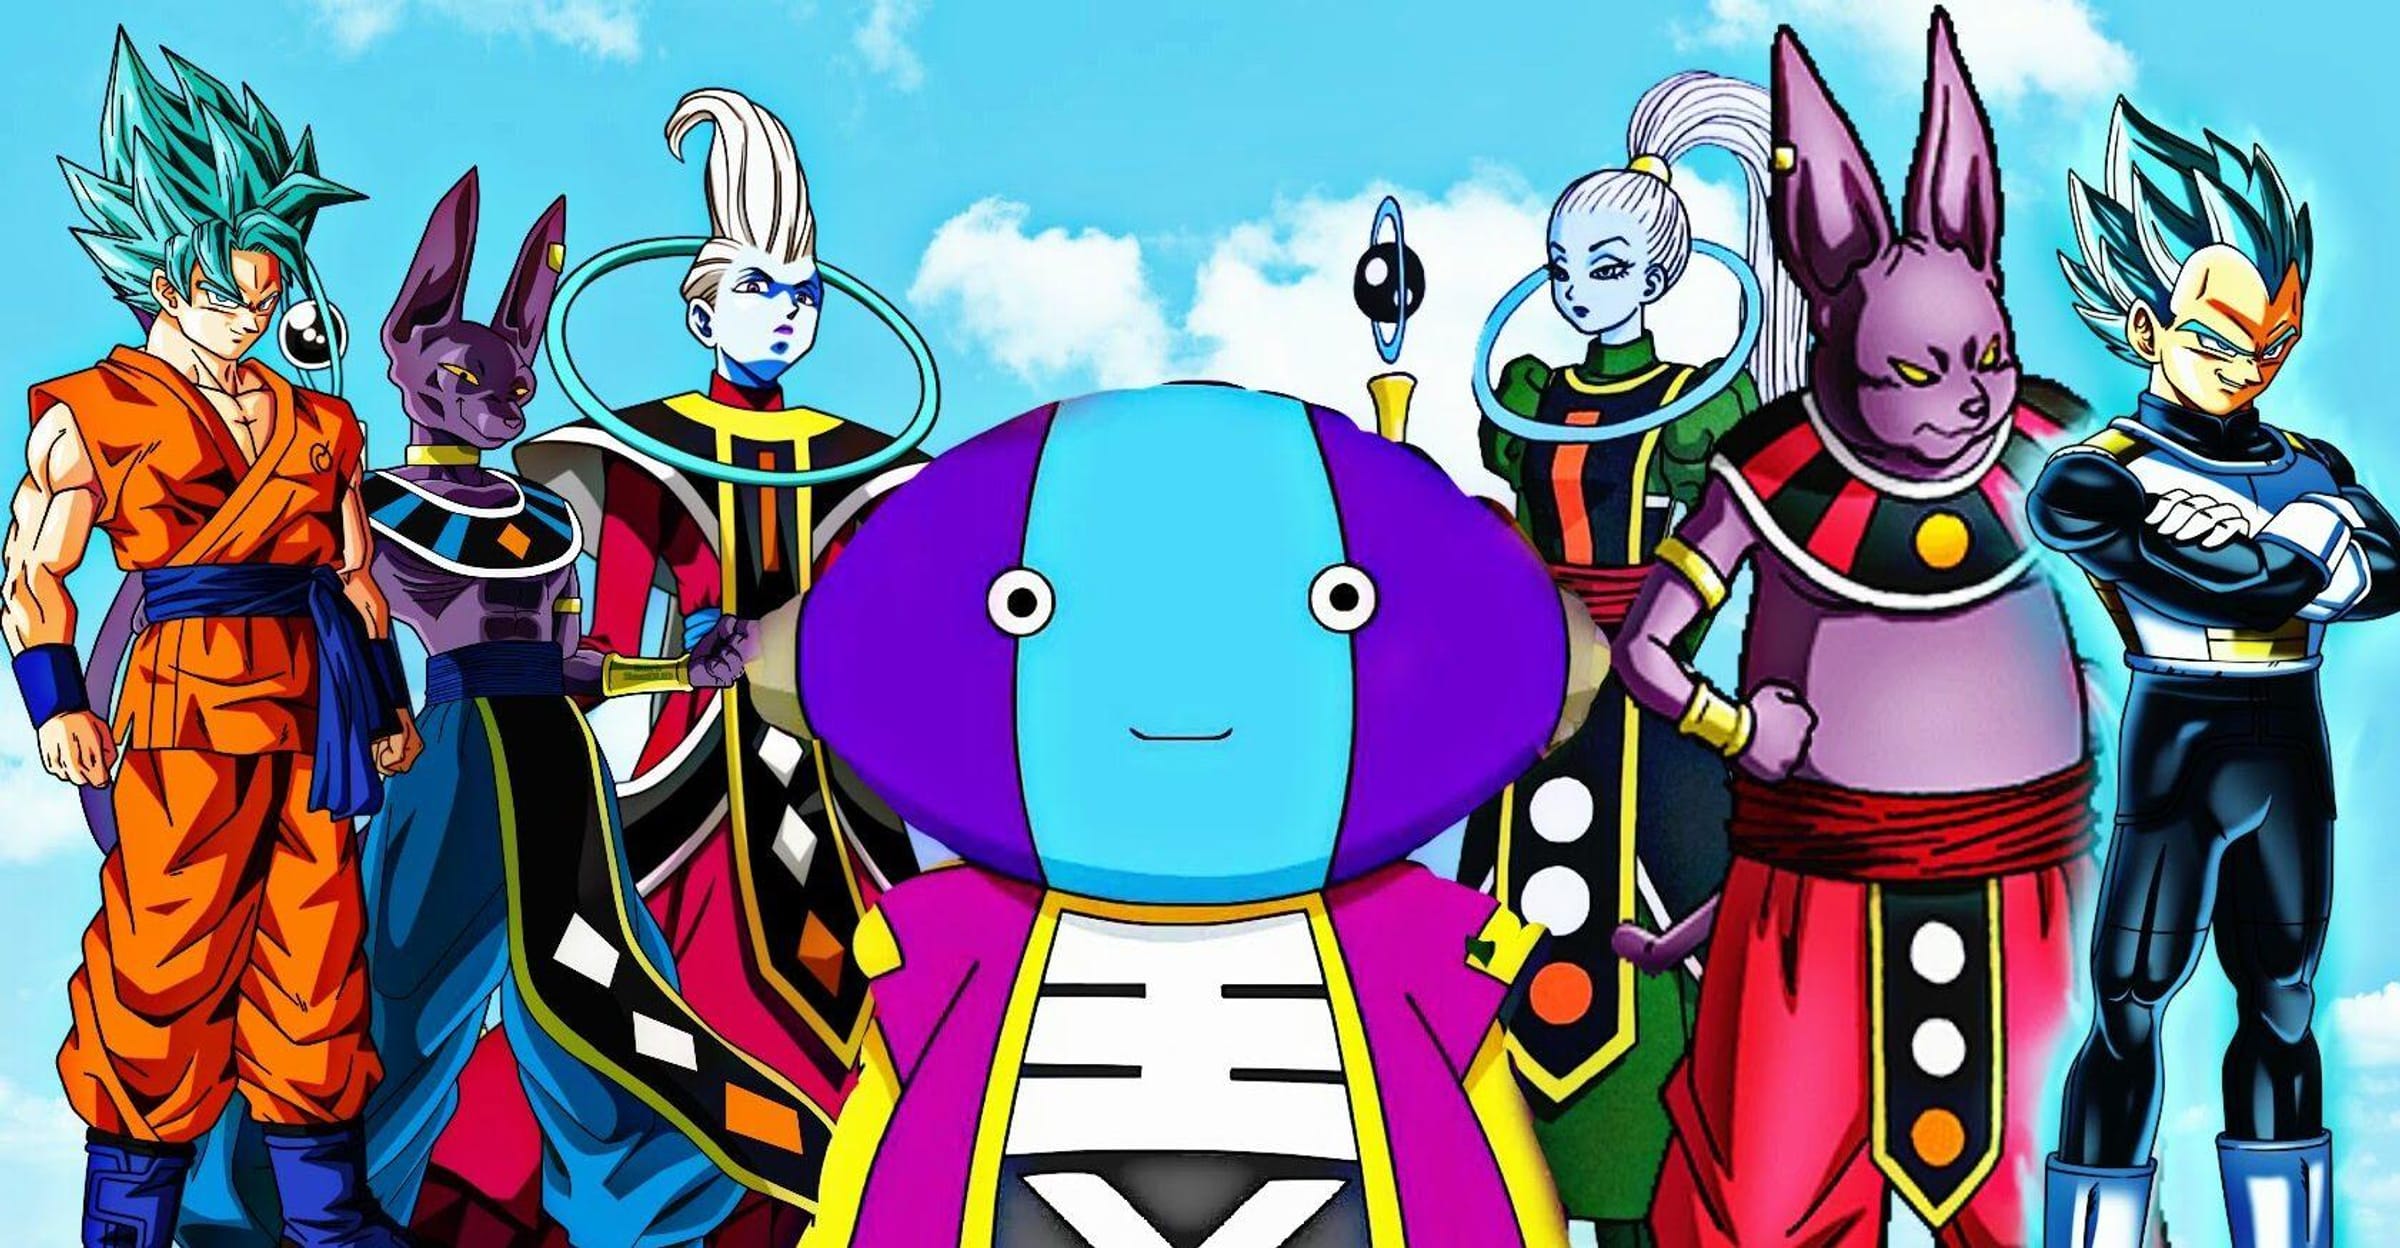 How Dragon Ball Super: Super Hero fits in the larger story of the